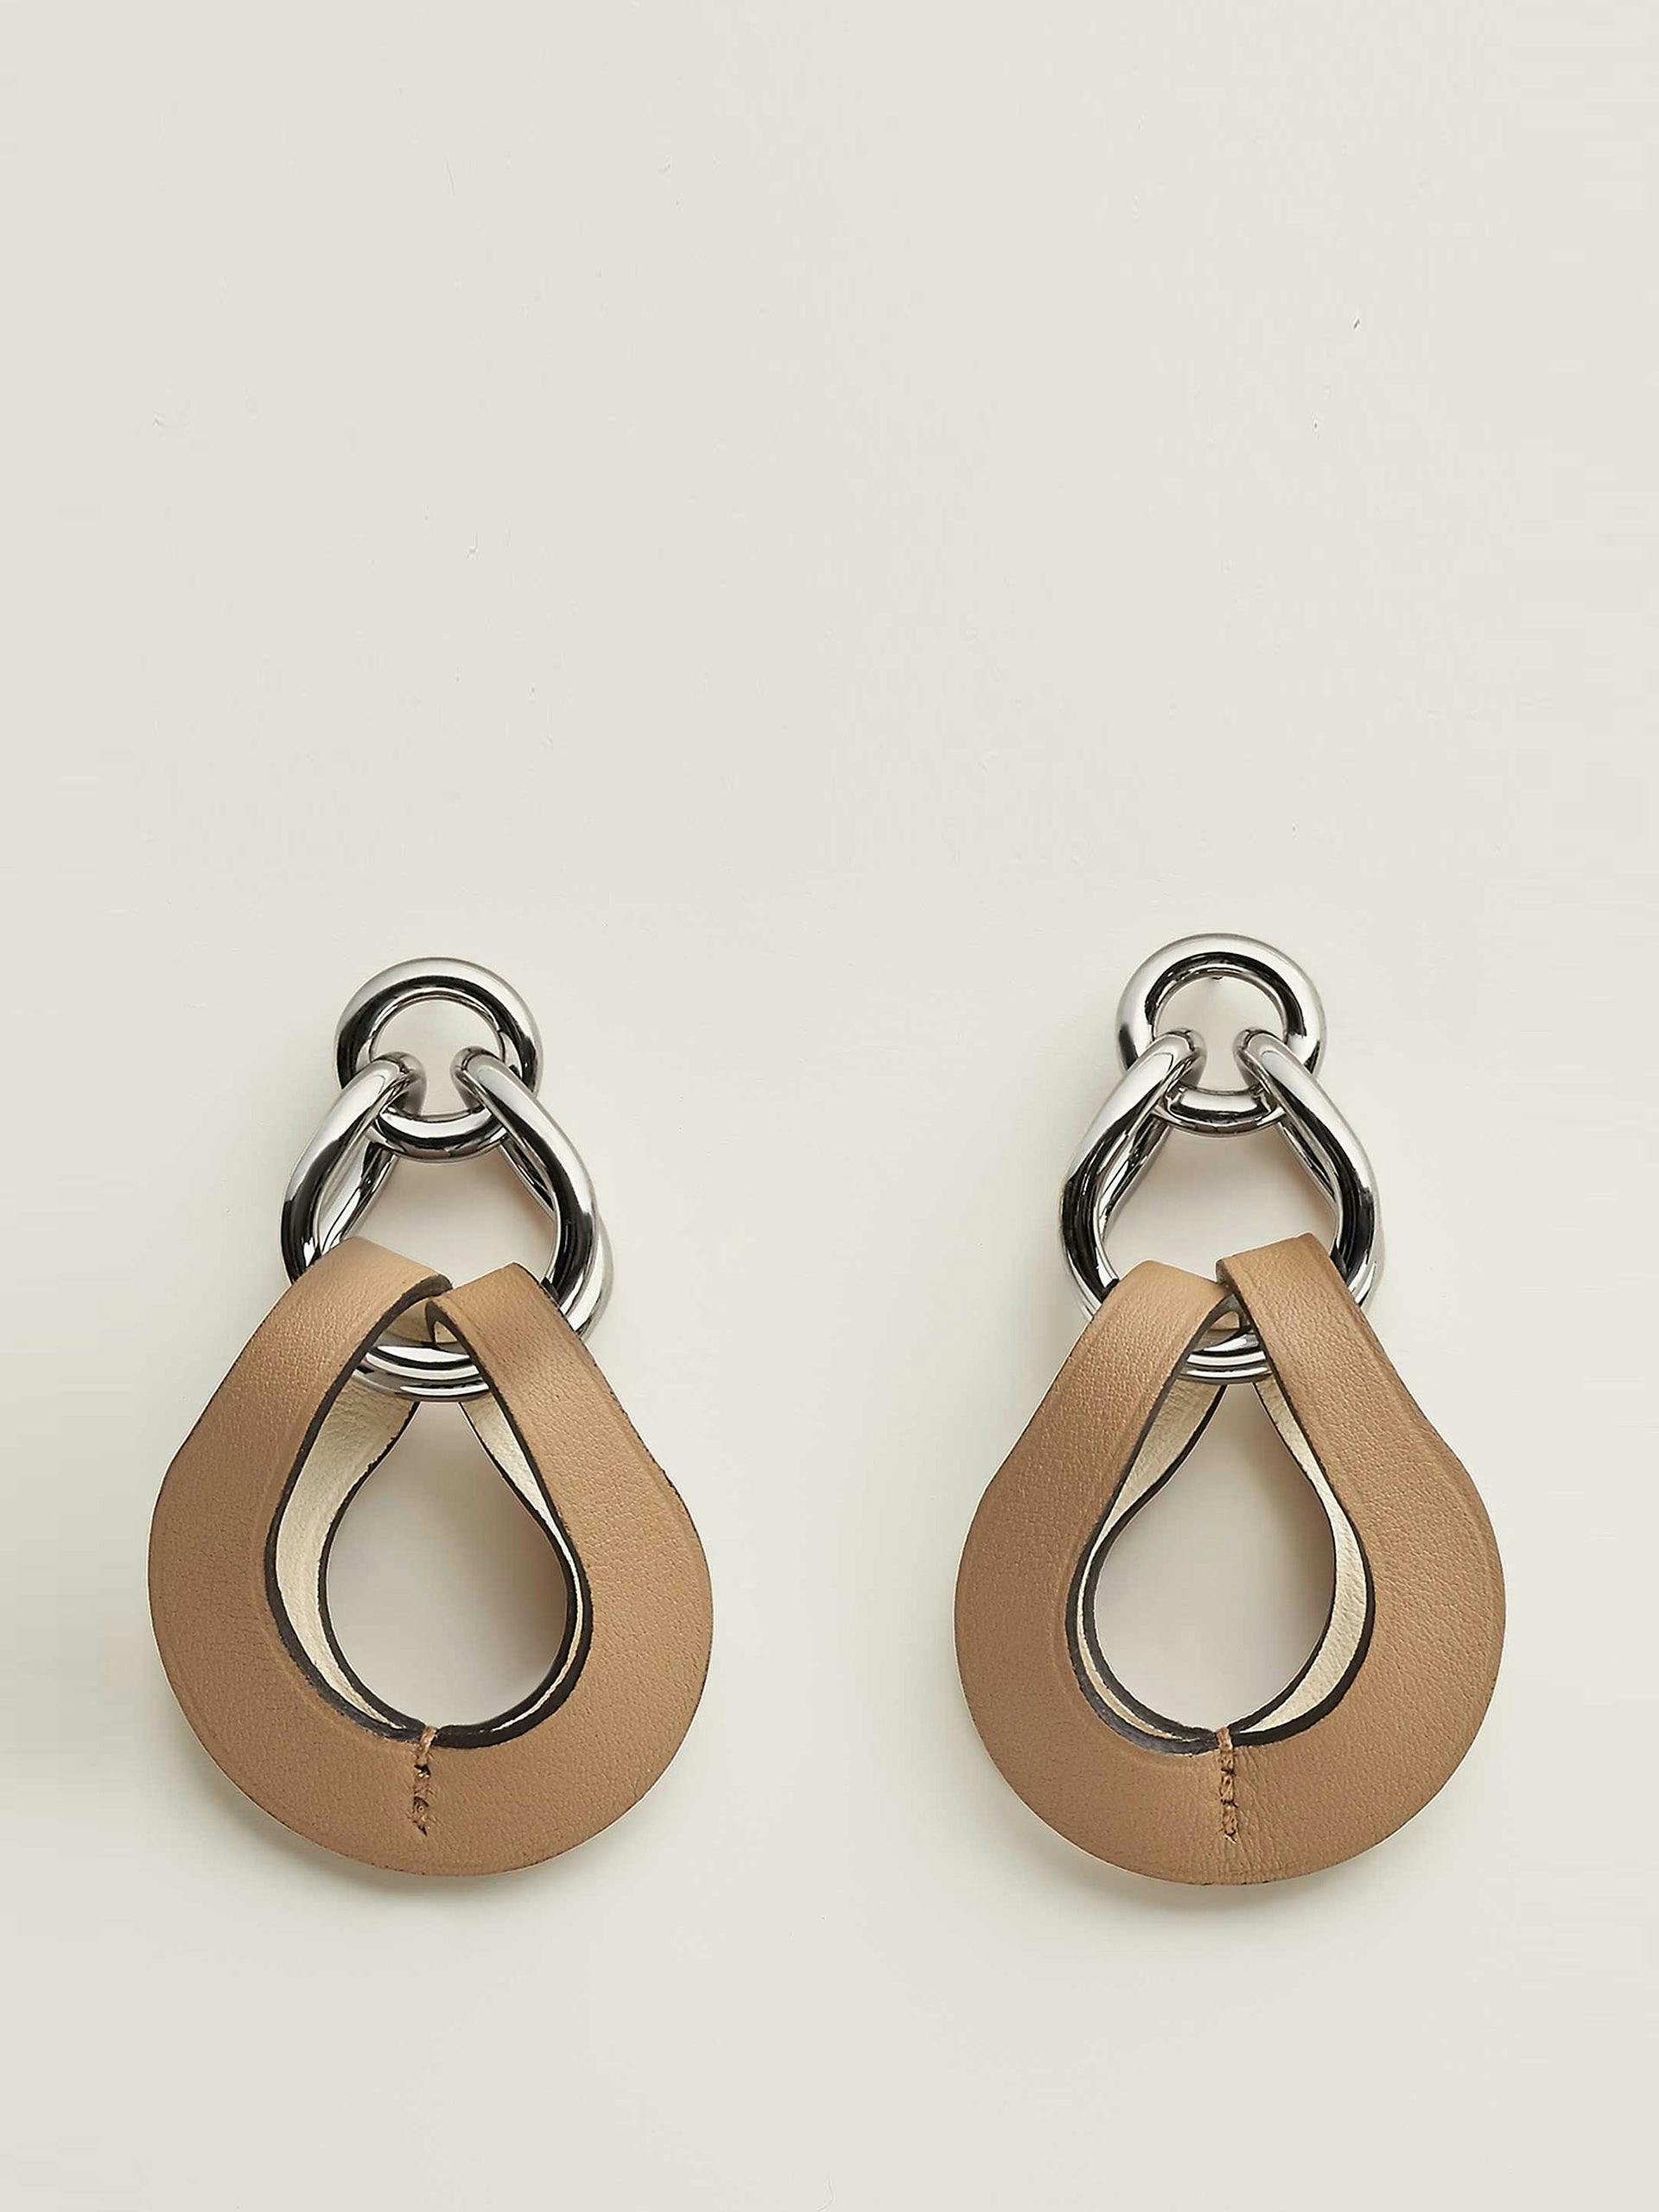 Leather and metal link earrings